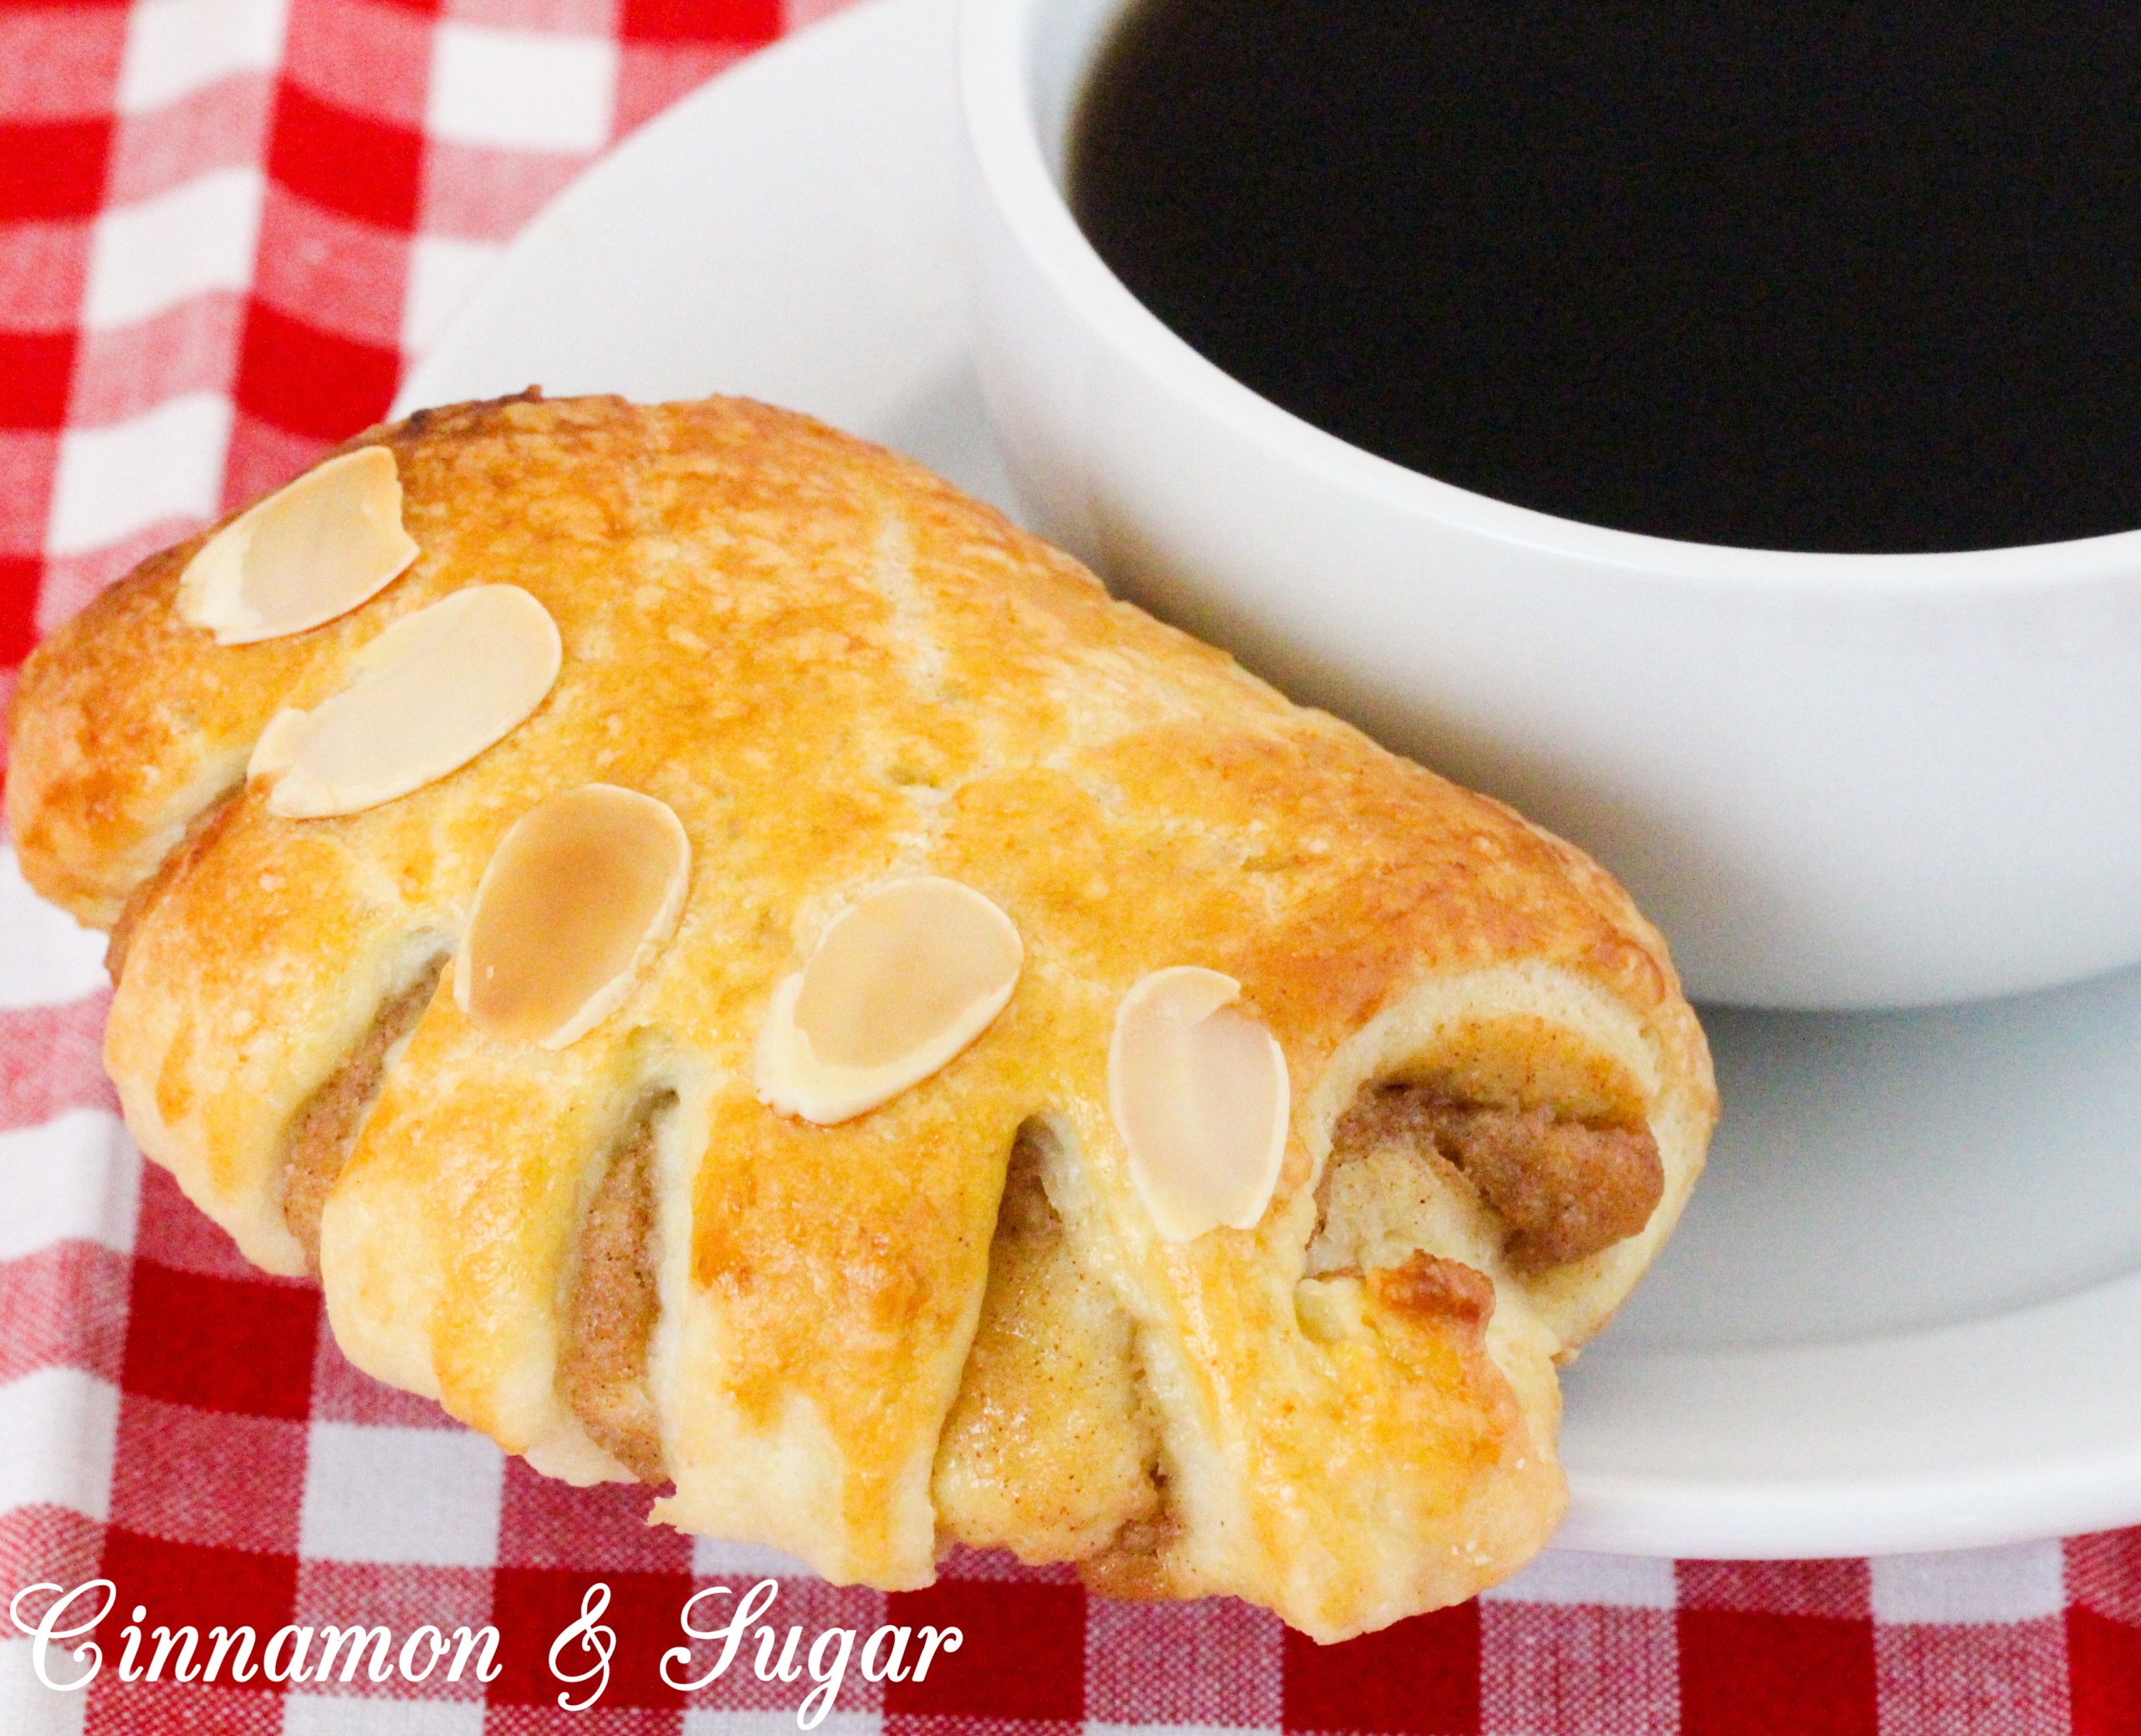 With flaky pastry encasing a sweet almond filling, these Almond Bear Claws are a scrumptious addition to breakfast, brunch, or coffee break! Recipe shared with permission granted by Elizabeth Logan, author of MOUSSE AND MURDER.